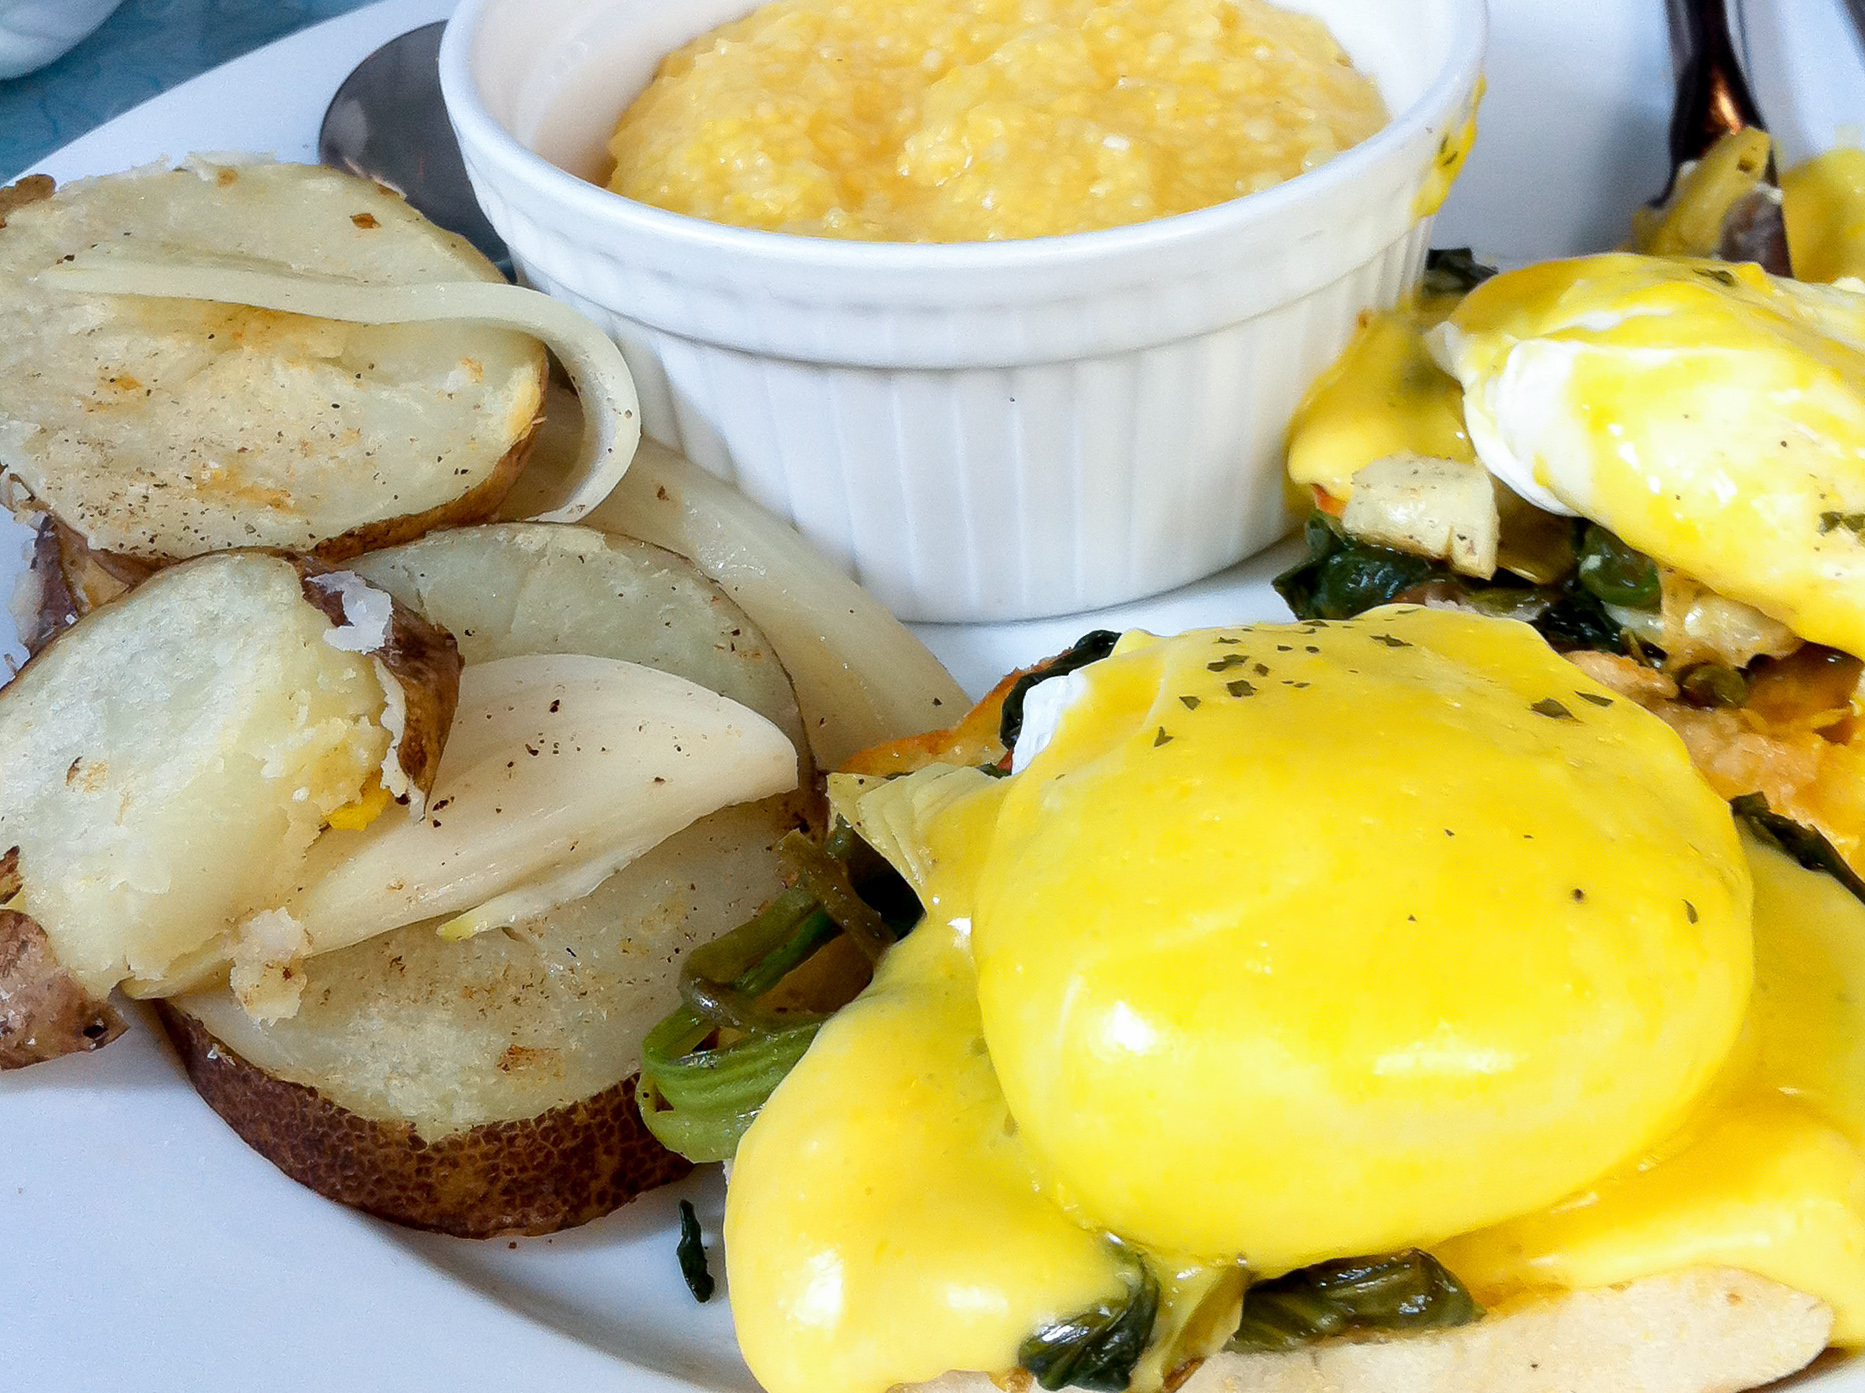 Eggs benedict and grits at The Flying Pan in Hong Kong. Photo by alphacityguides.